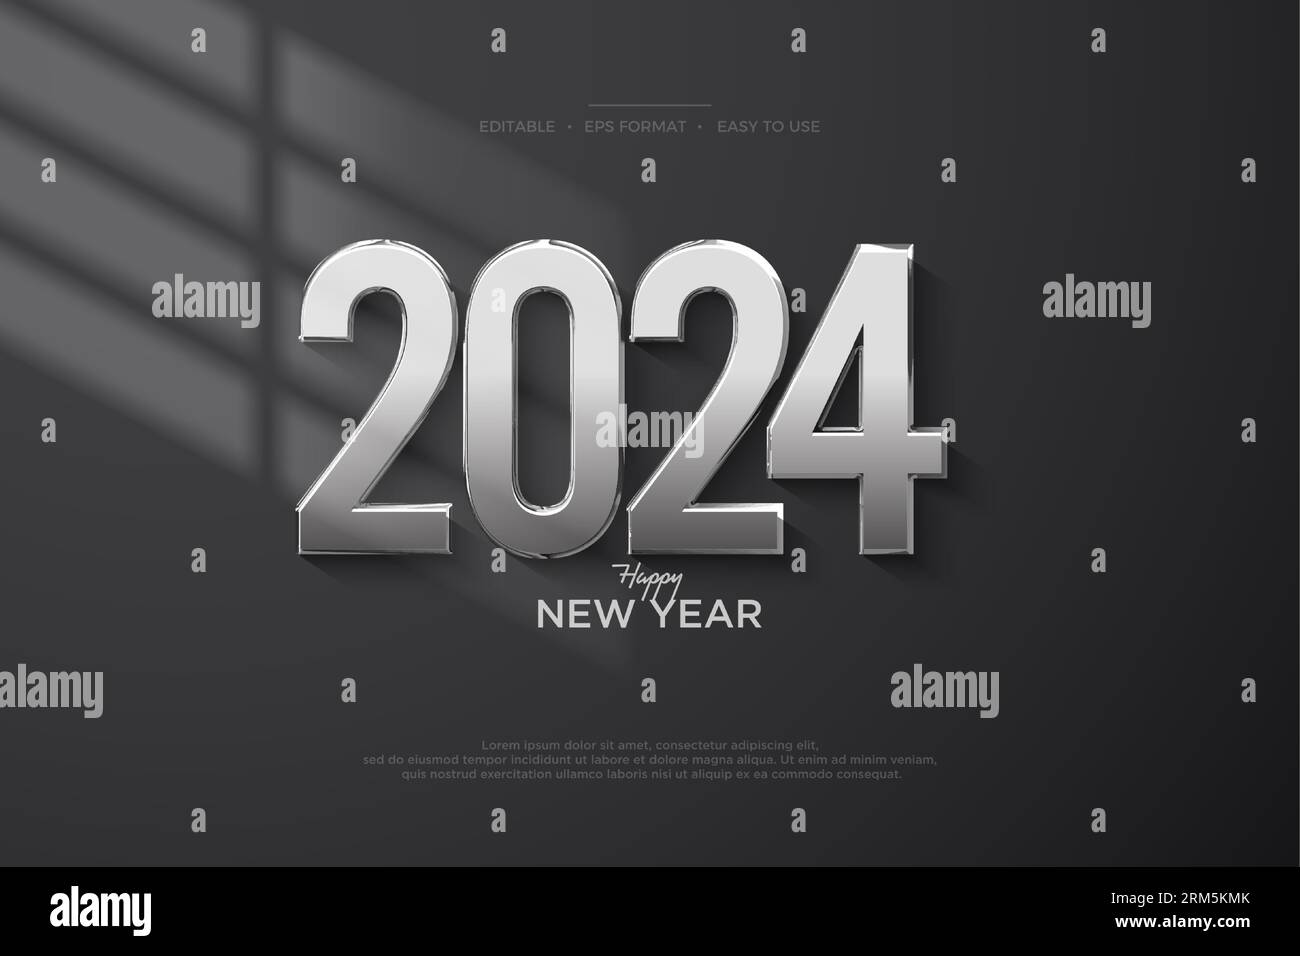 Modern design of happy new year 2024 celebration with numbers stuck on the wall. Premium design with a shiny silver color exposed to light. Stock Vector